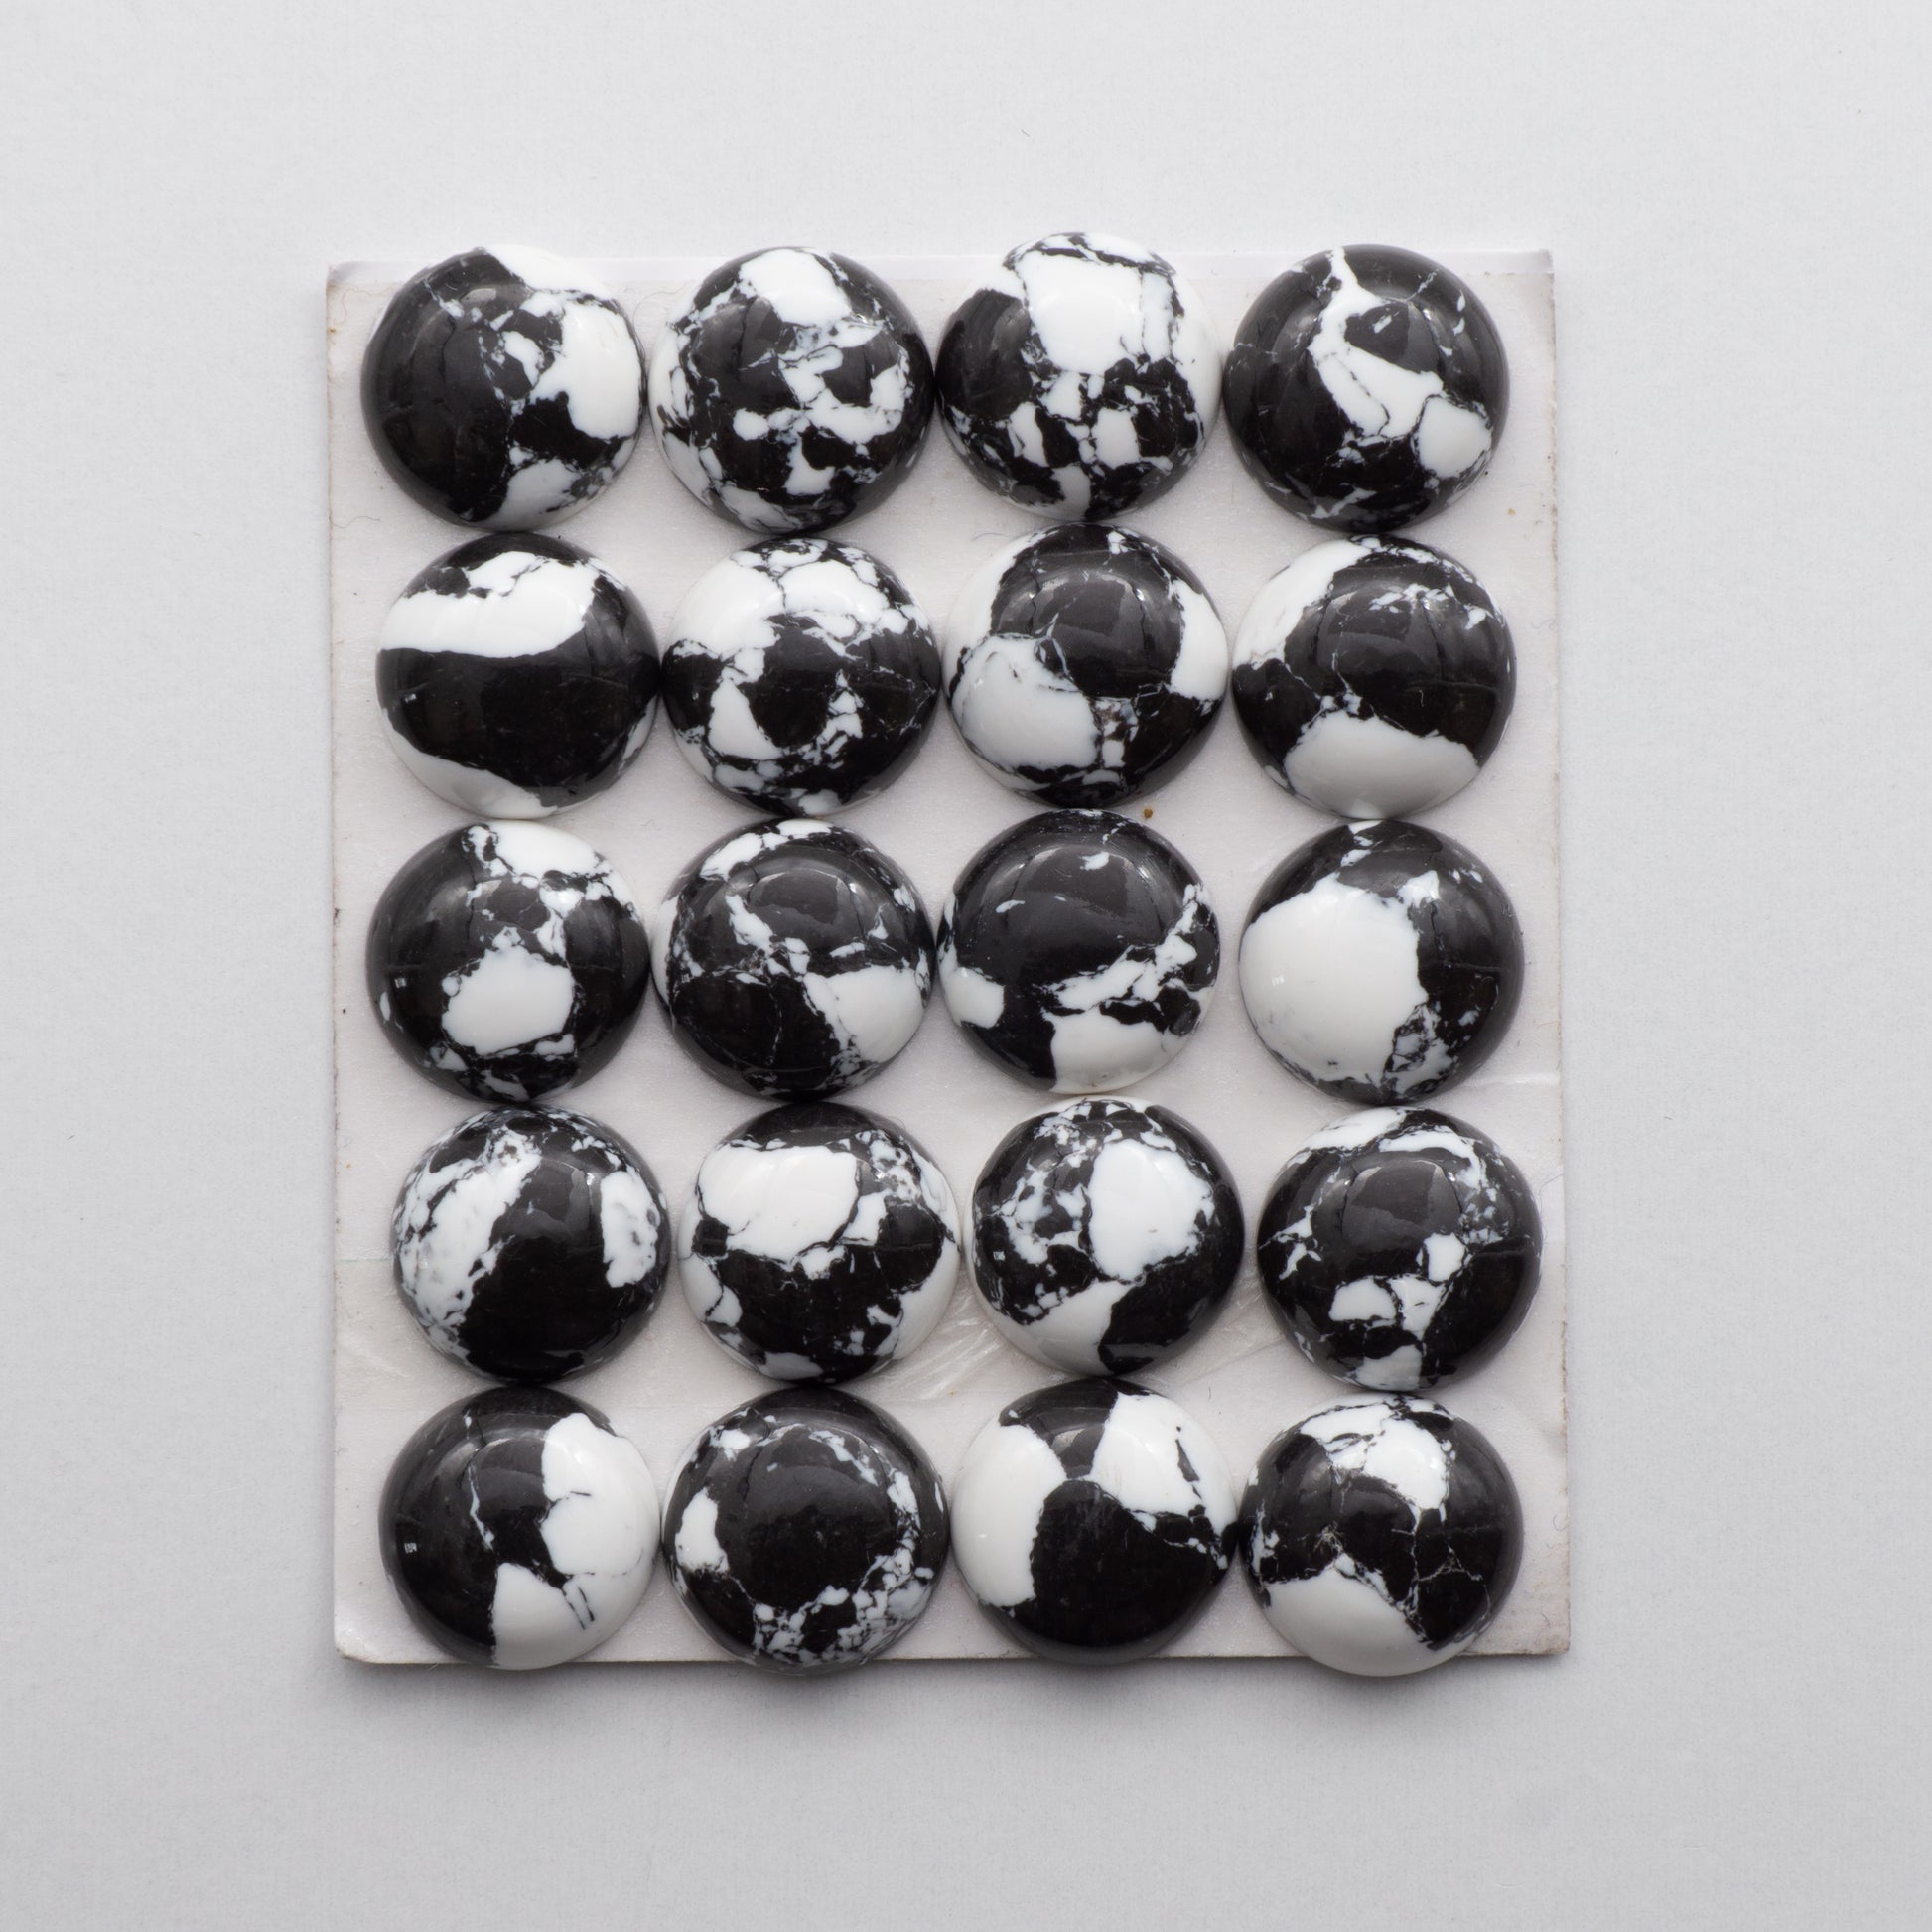 White Buffalo Cabochons are expertly cut and polished from composite material to create a stunning and durable gemstone. These stones measure 12x12mm and are unbacked.